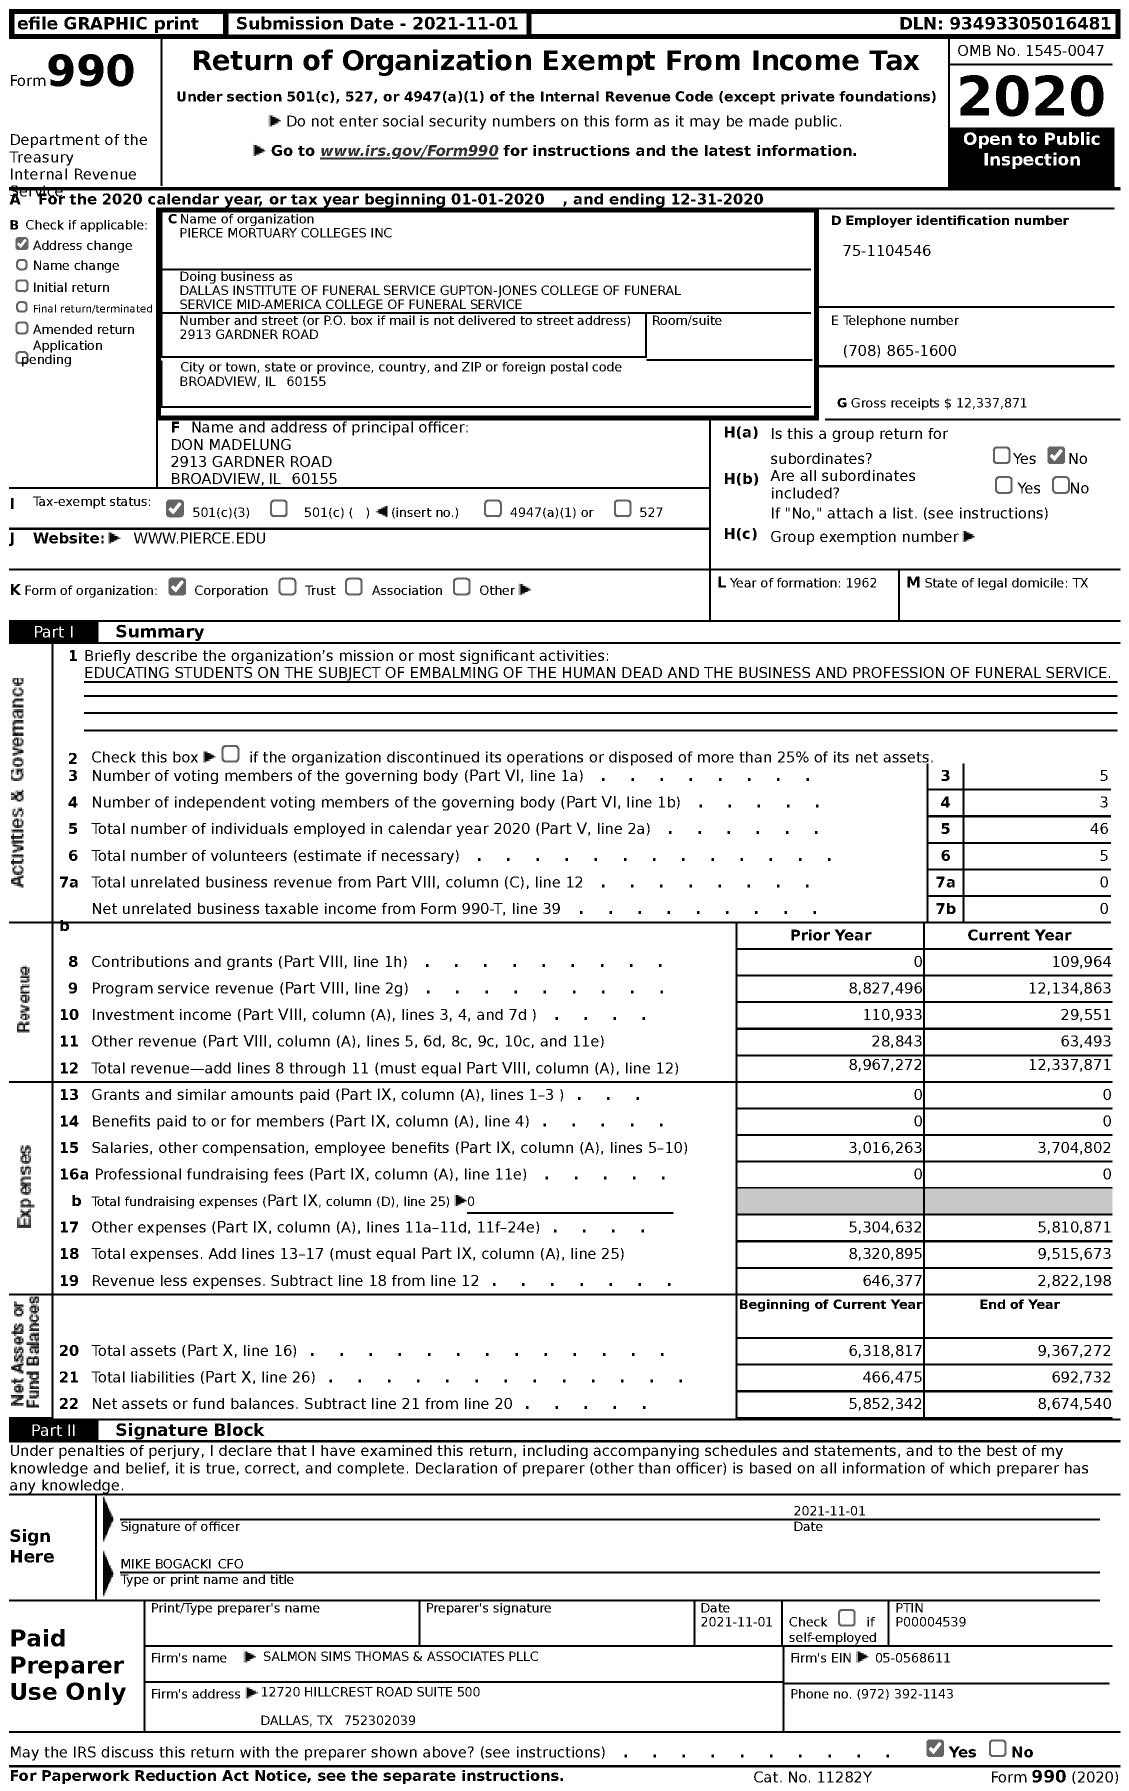 Image of first page of 2020 Form 990 for Dallas Institute of Funeral Service Gupton-Jones College of Funeral Service Mid-America College of Funeral Service